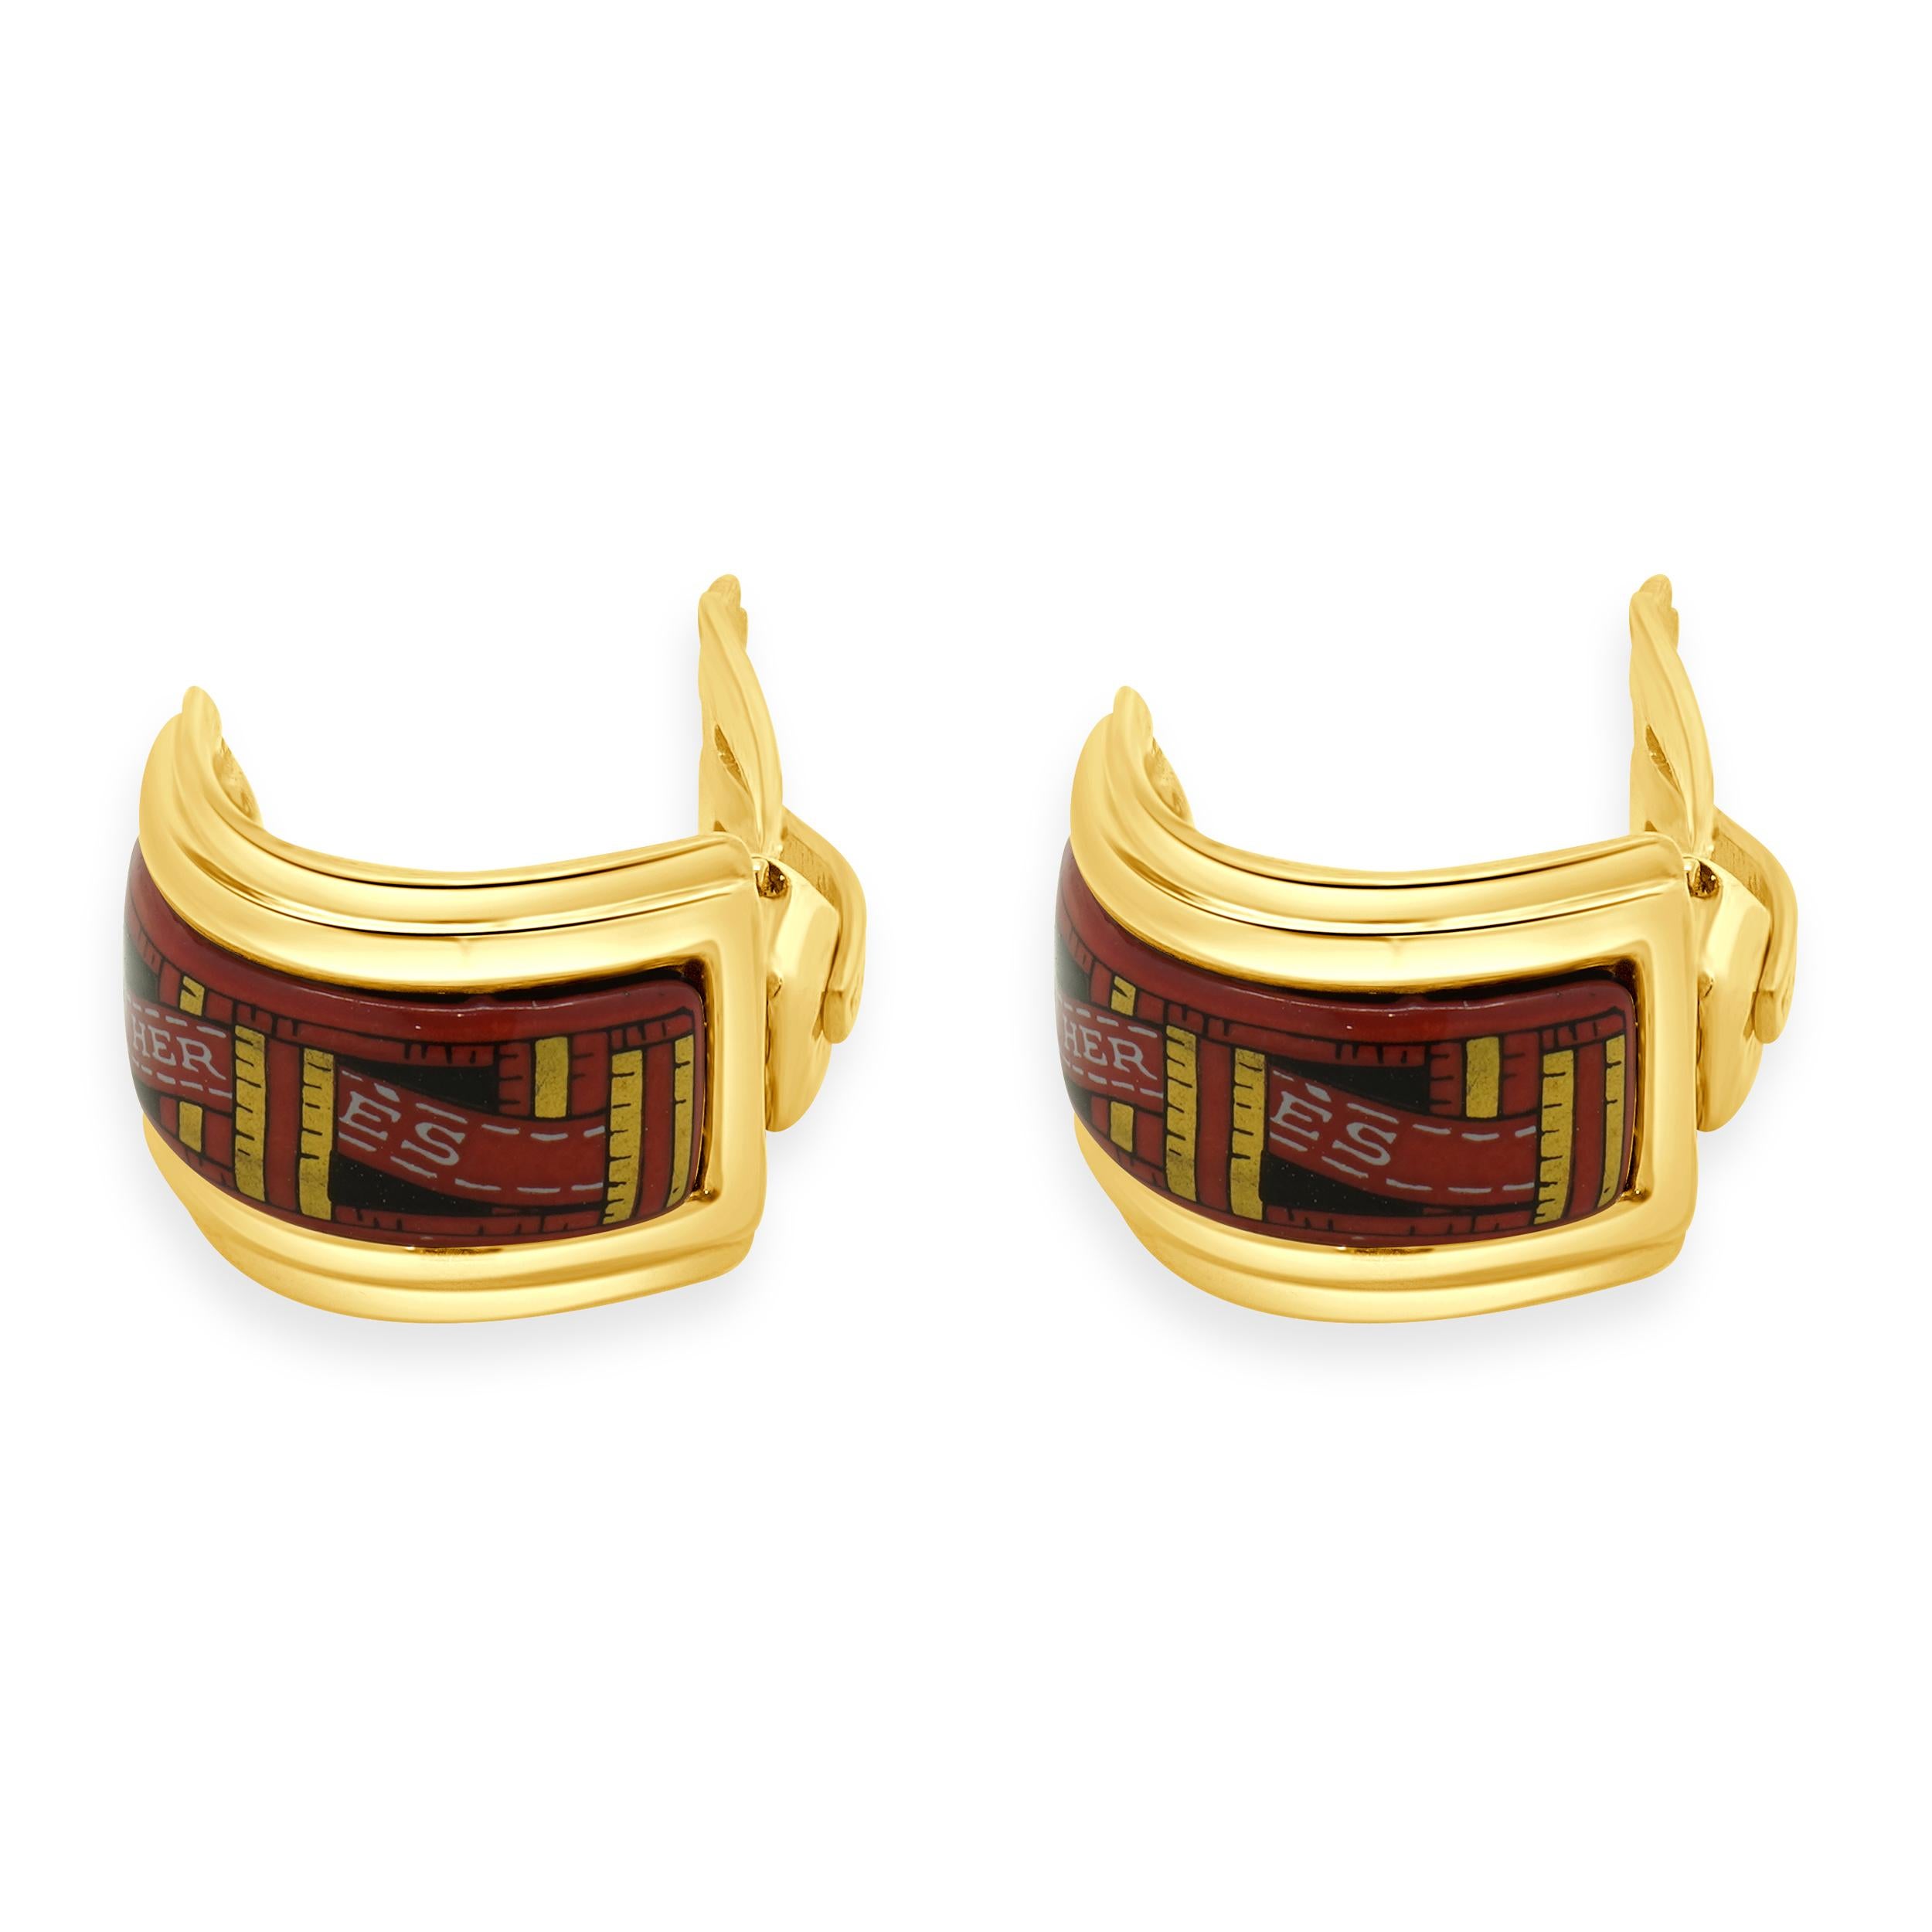 Designer: Hermes
Material: gold plated
Dimensions: earrings measure 21.5 x 14.3mm
Weight: 14.24 grams
